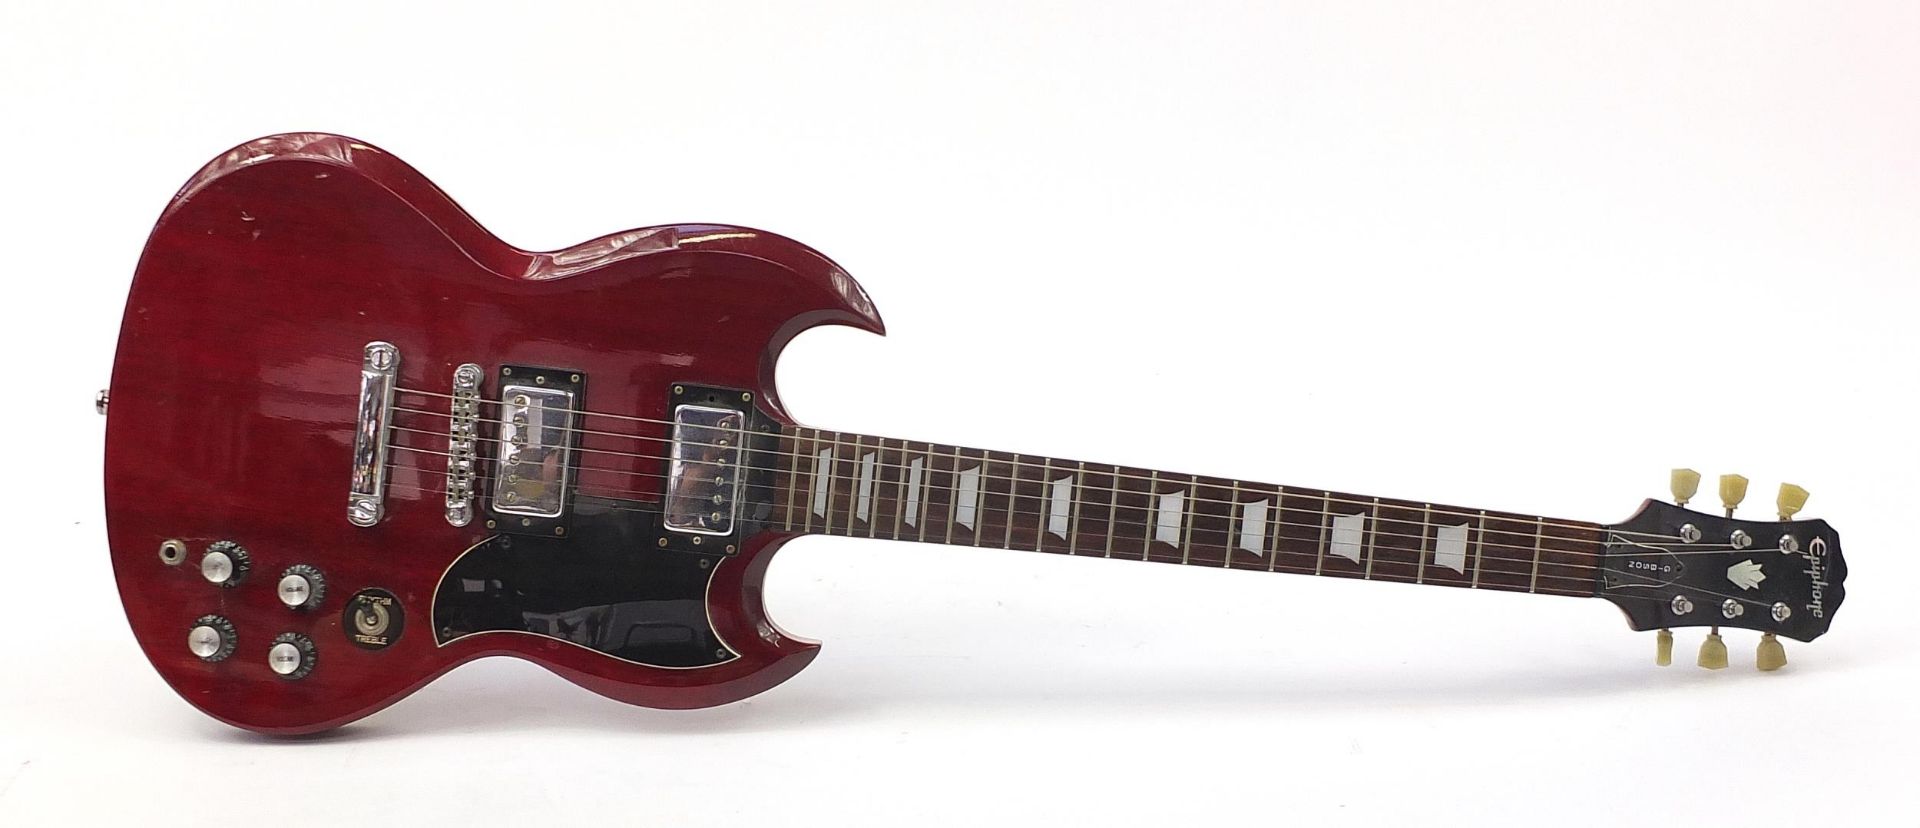 Red lacquered Gibson Epiphone six string electric guitar, serial number S01015681, 100cm in length